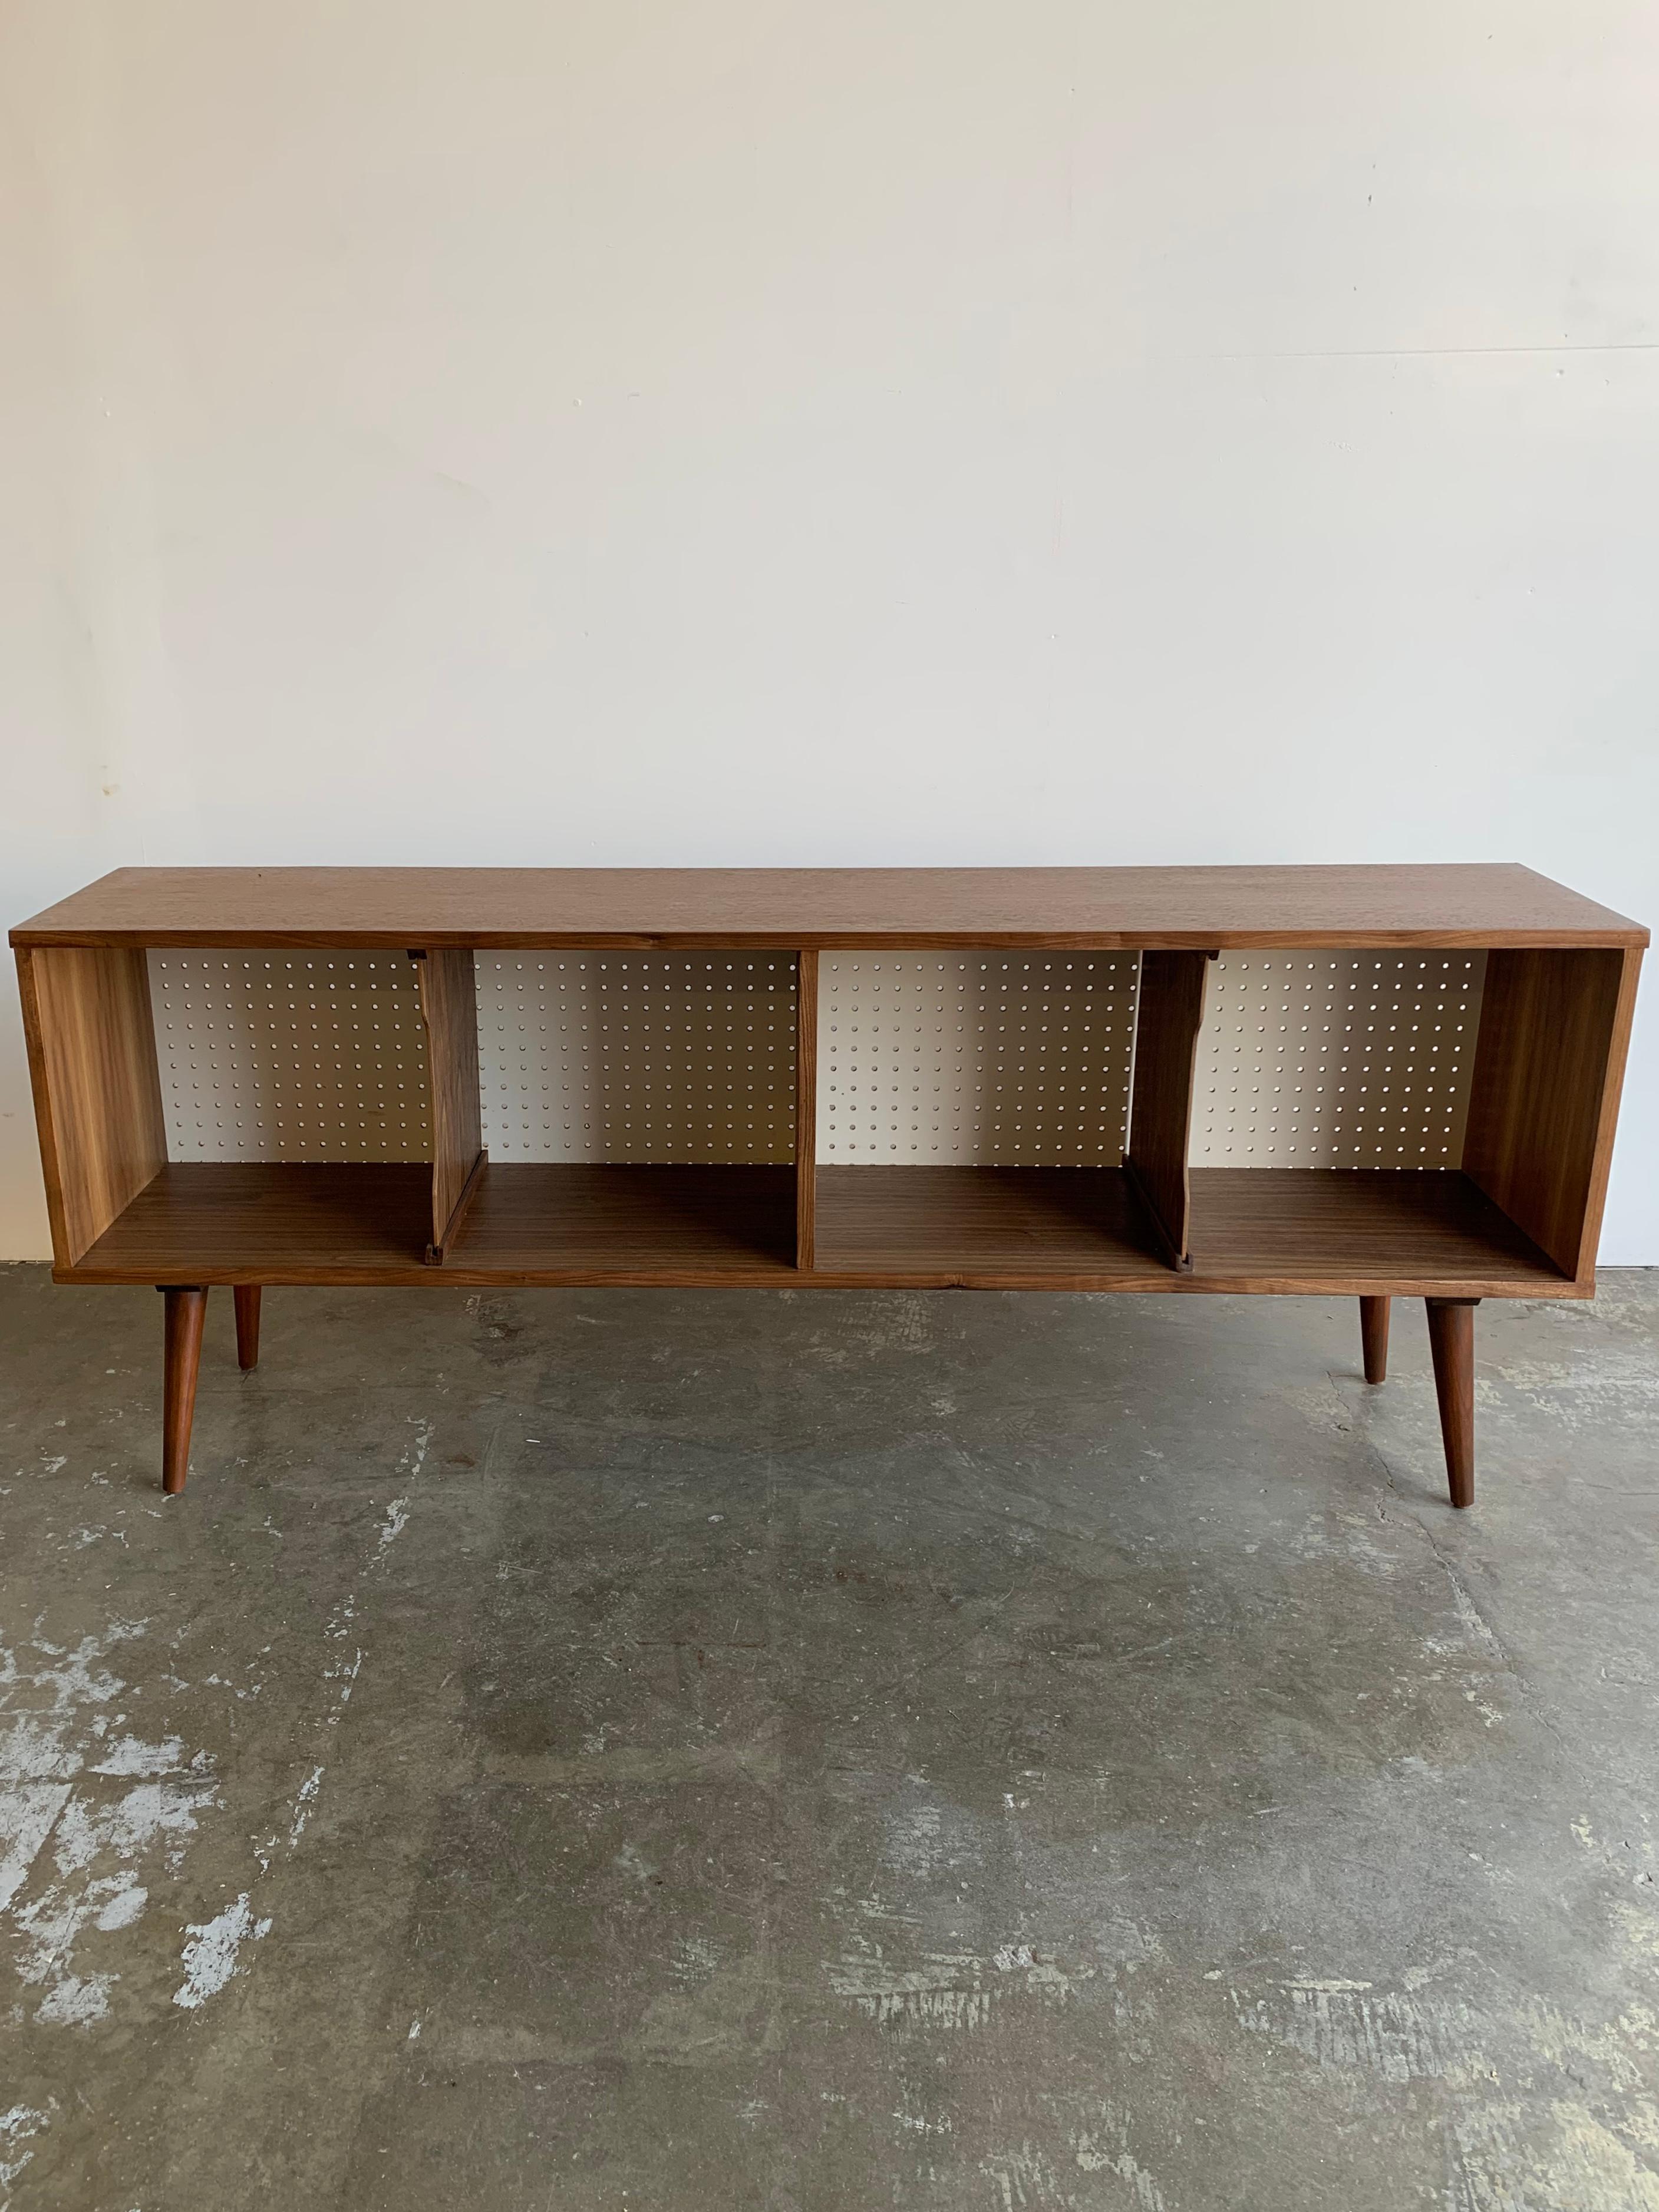 Wonderful gently used walnut bookcase or record holder. Divider are removable perforated back is a think lightweight material making it easier for media home to be cut if needed.

This item was hand crafted and used in our staging service for a